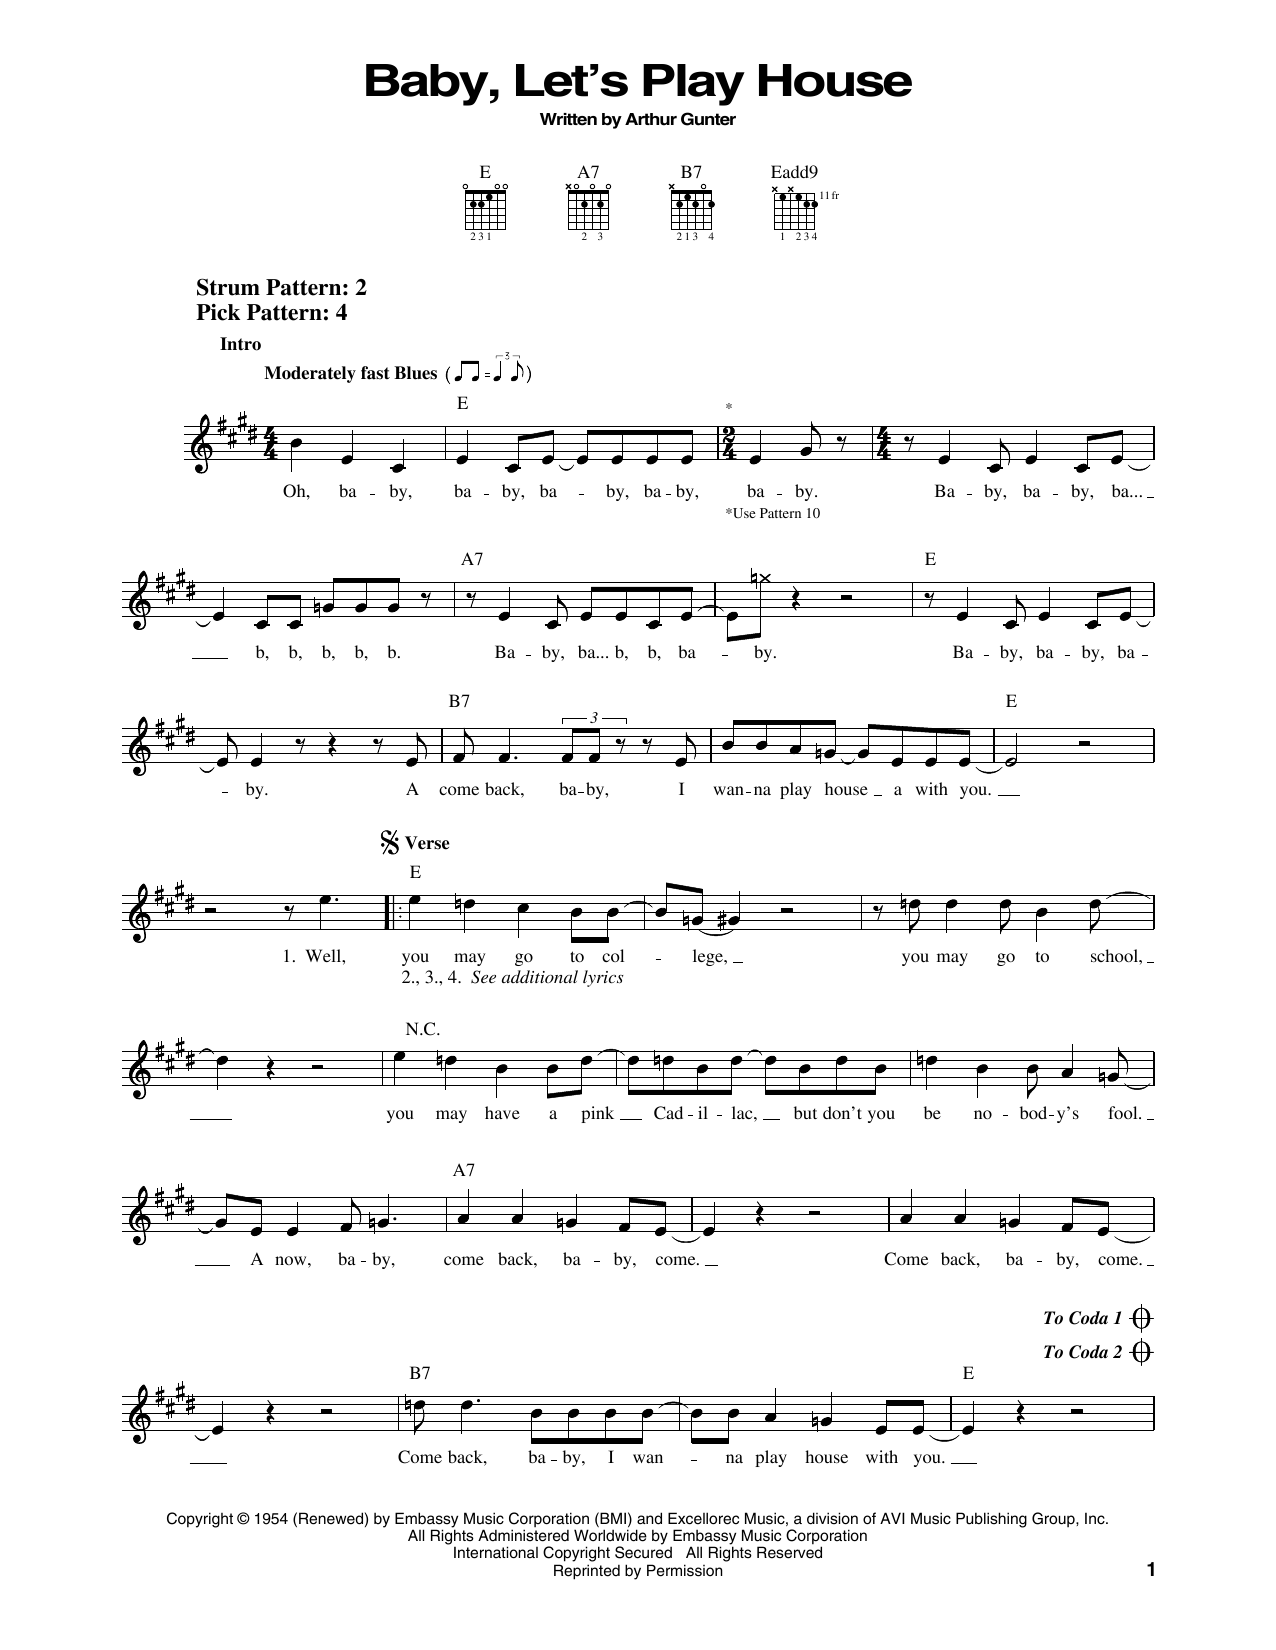 Download Elvis Presley Baby, Let's Play House Sheet Music